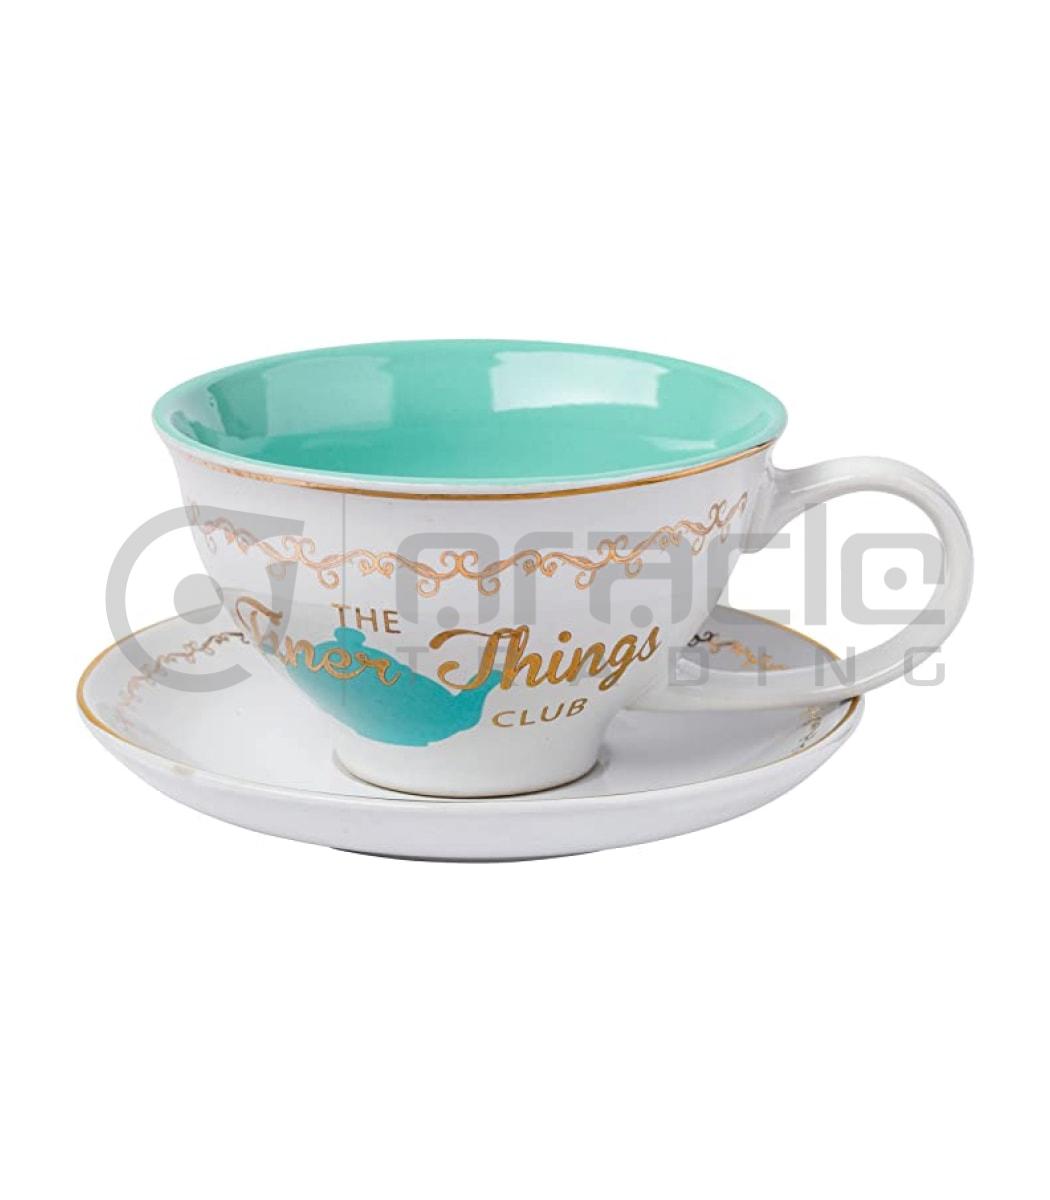 The Office Teacup & Saucer Set - Finer Things Club